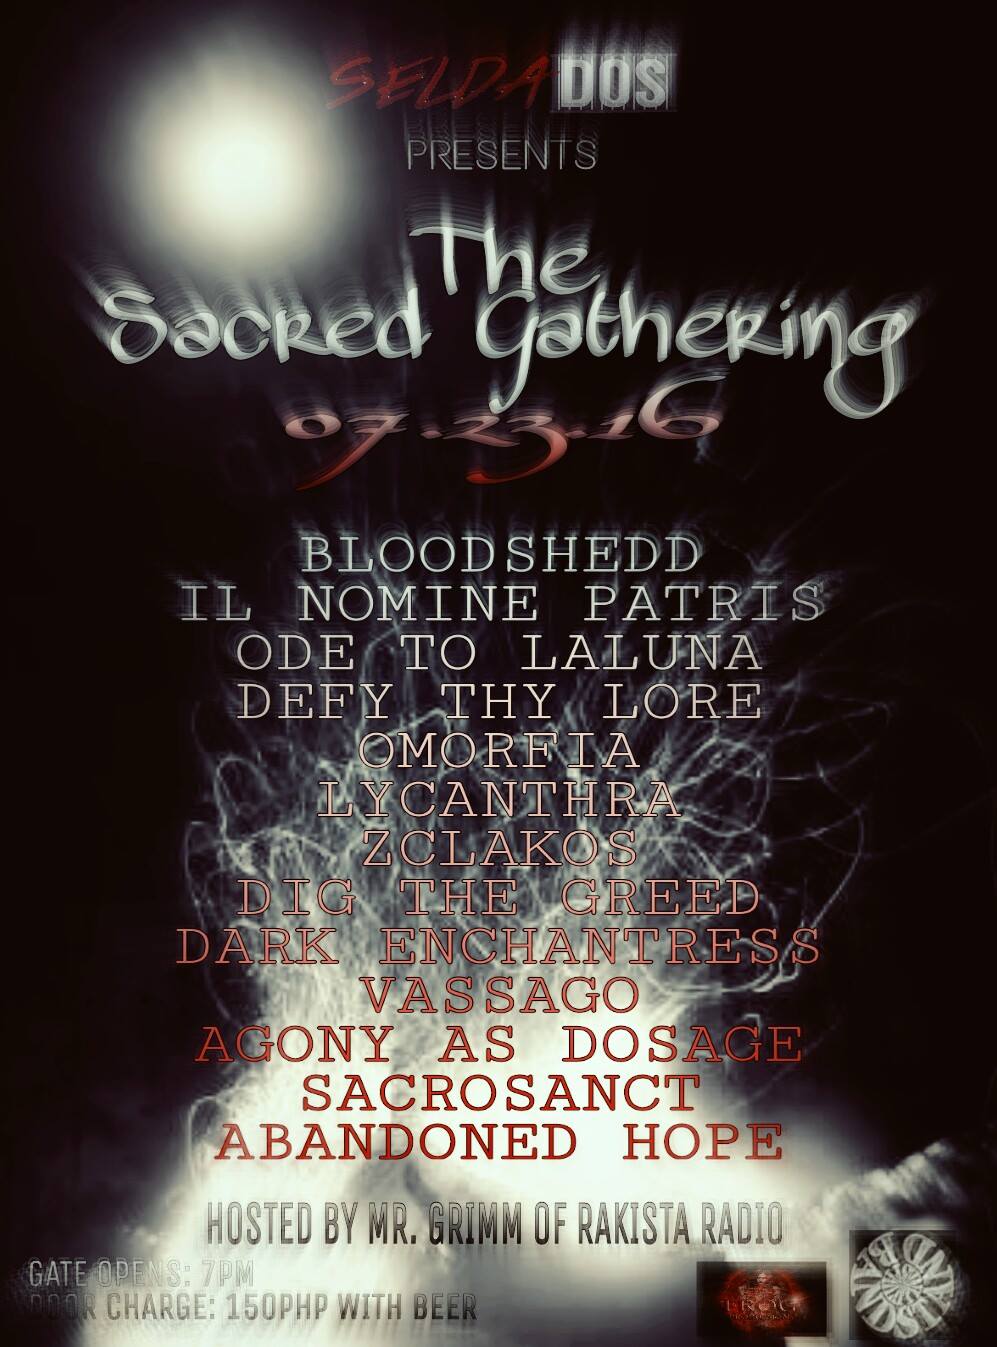 Selda-Dos Page Liked · July 10 ·   July 23 2016, Saturday, the night of the fading Full Moon, a great gathering will take place. Come and witness its execution!